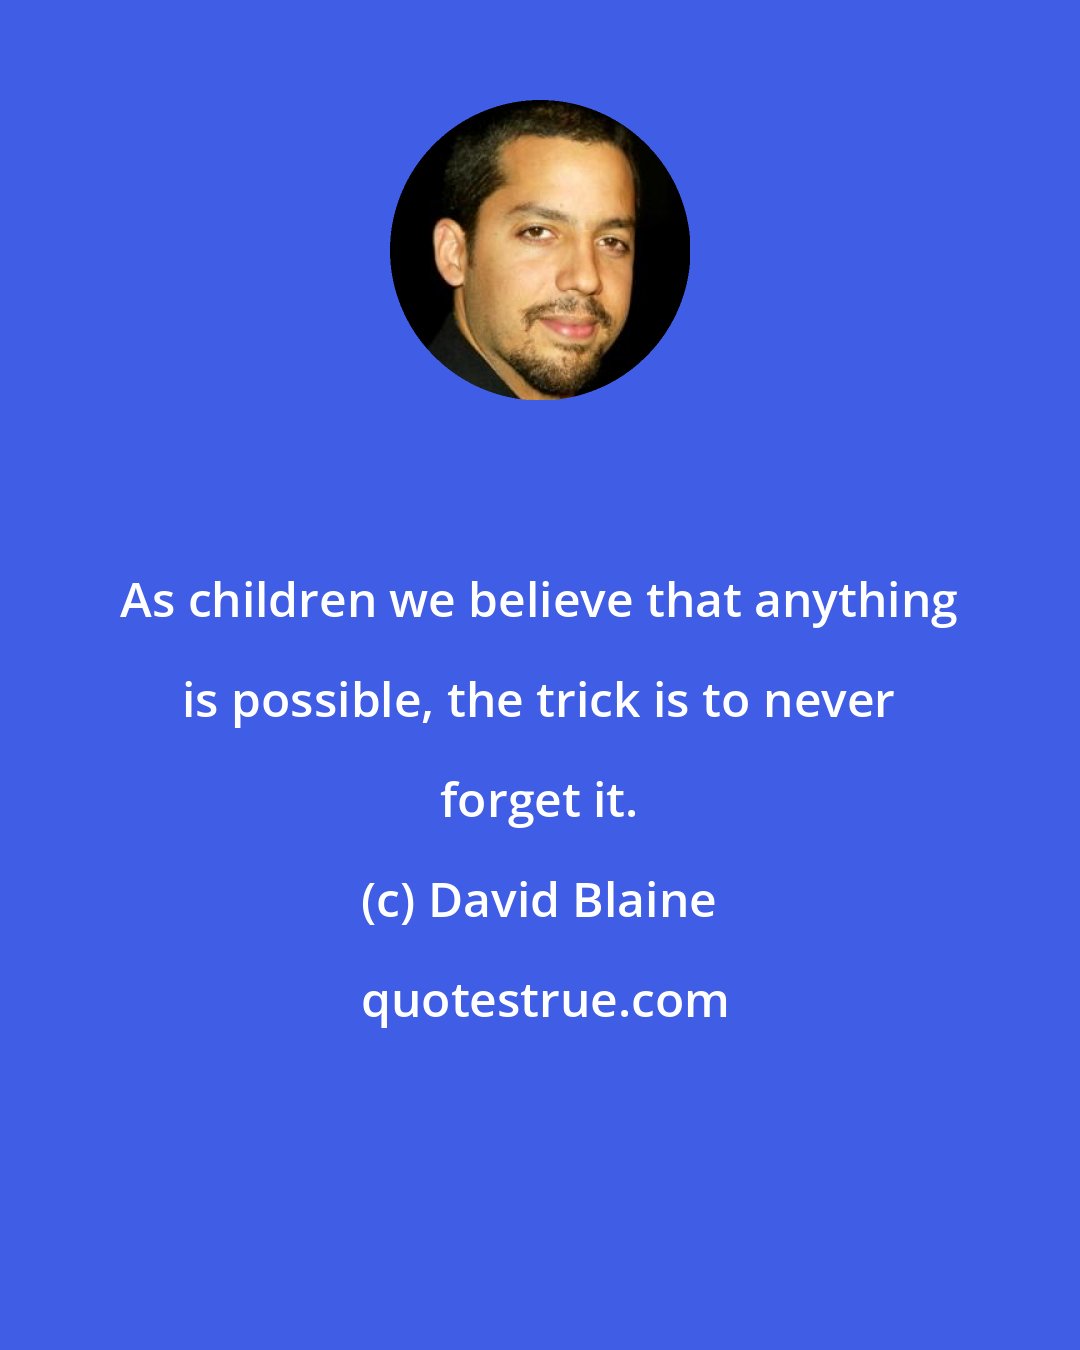 David Blaine: As children we believe that anything is possible, the trick is to never forget it.